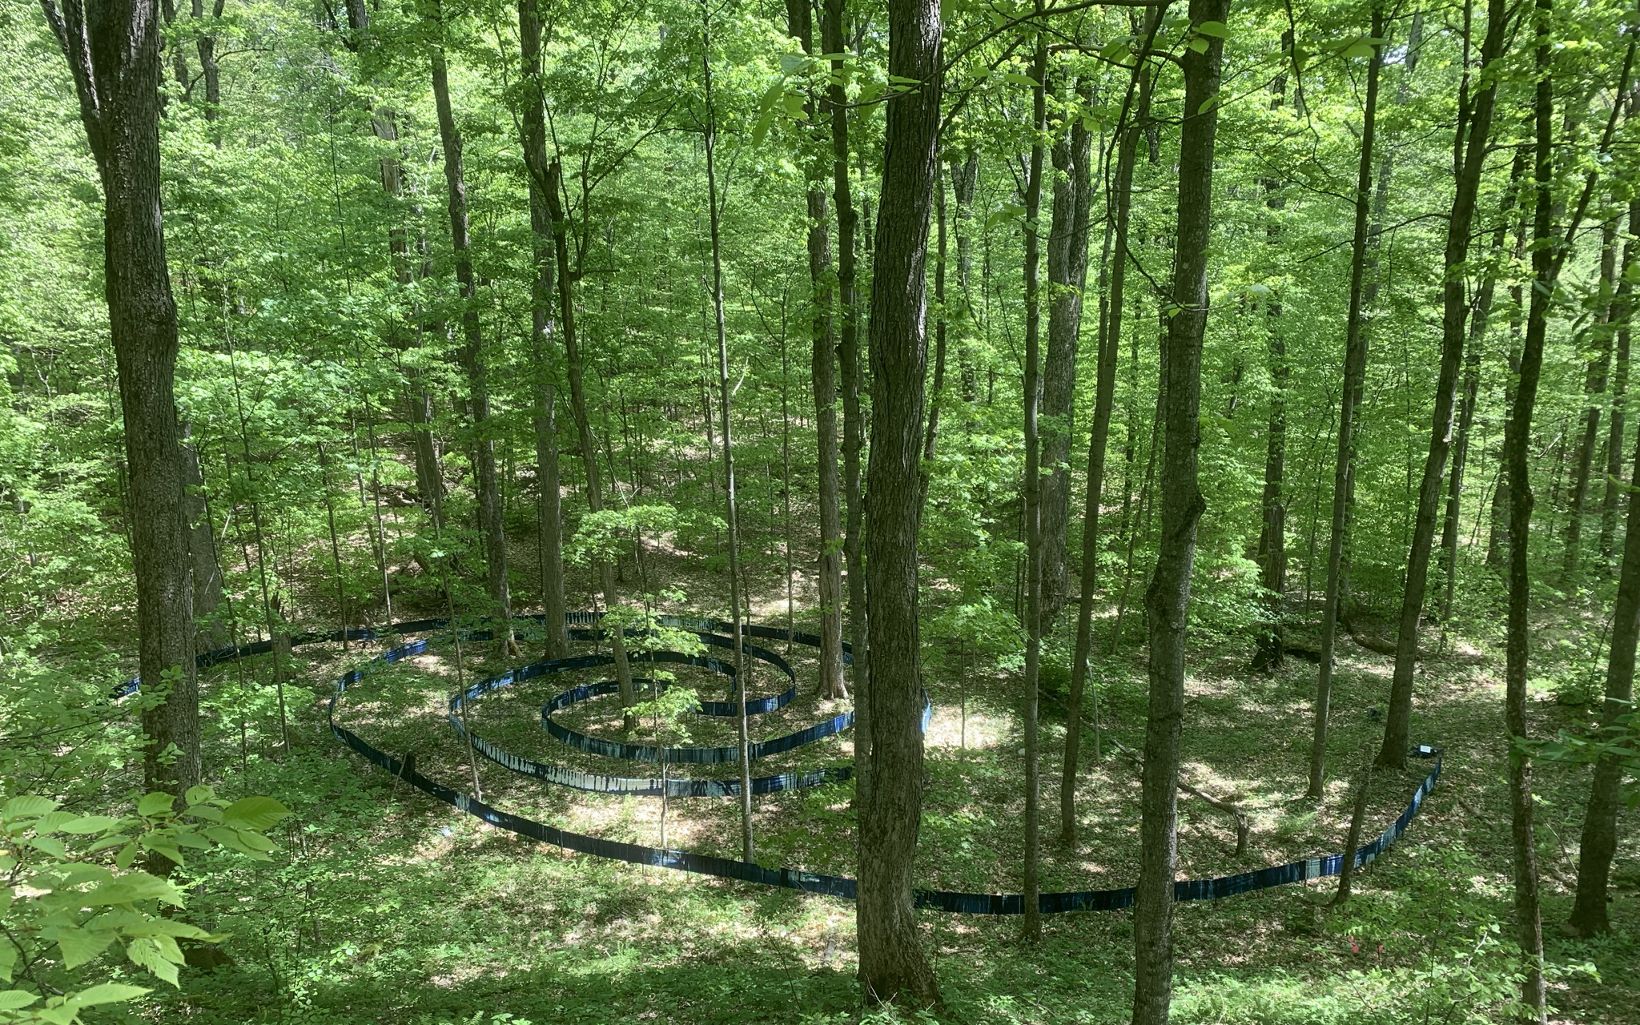 Labyrinth in Equinox Natural Area by Elizabeth Billings